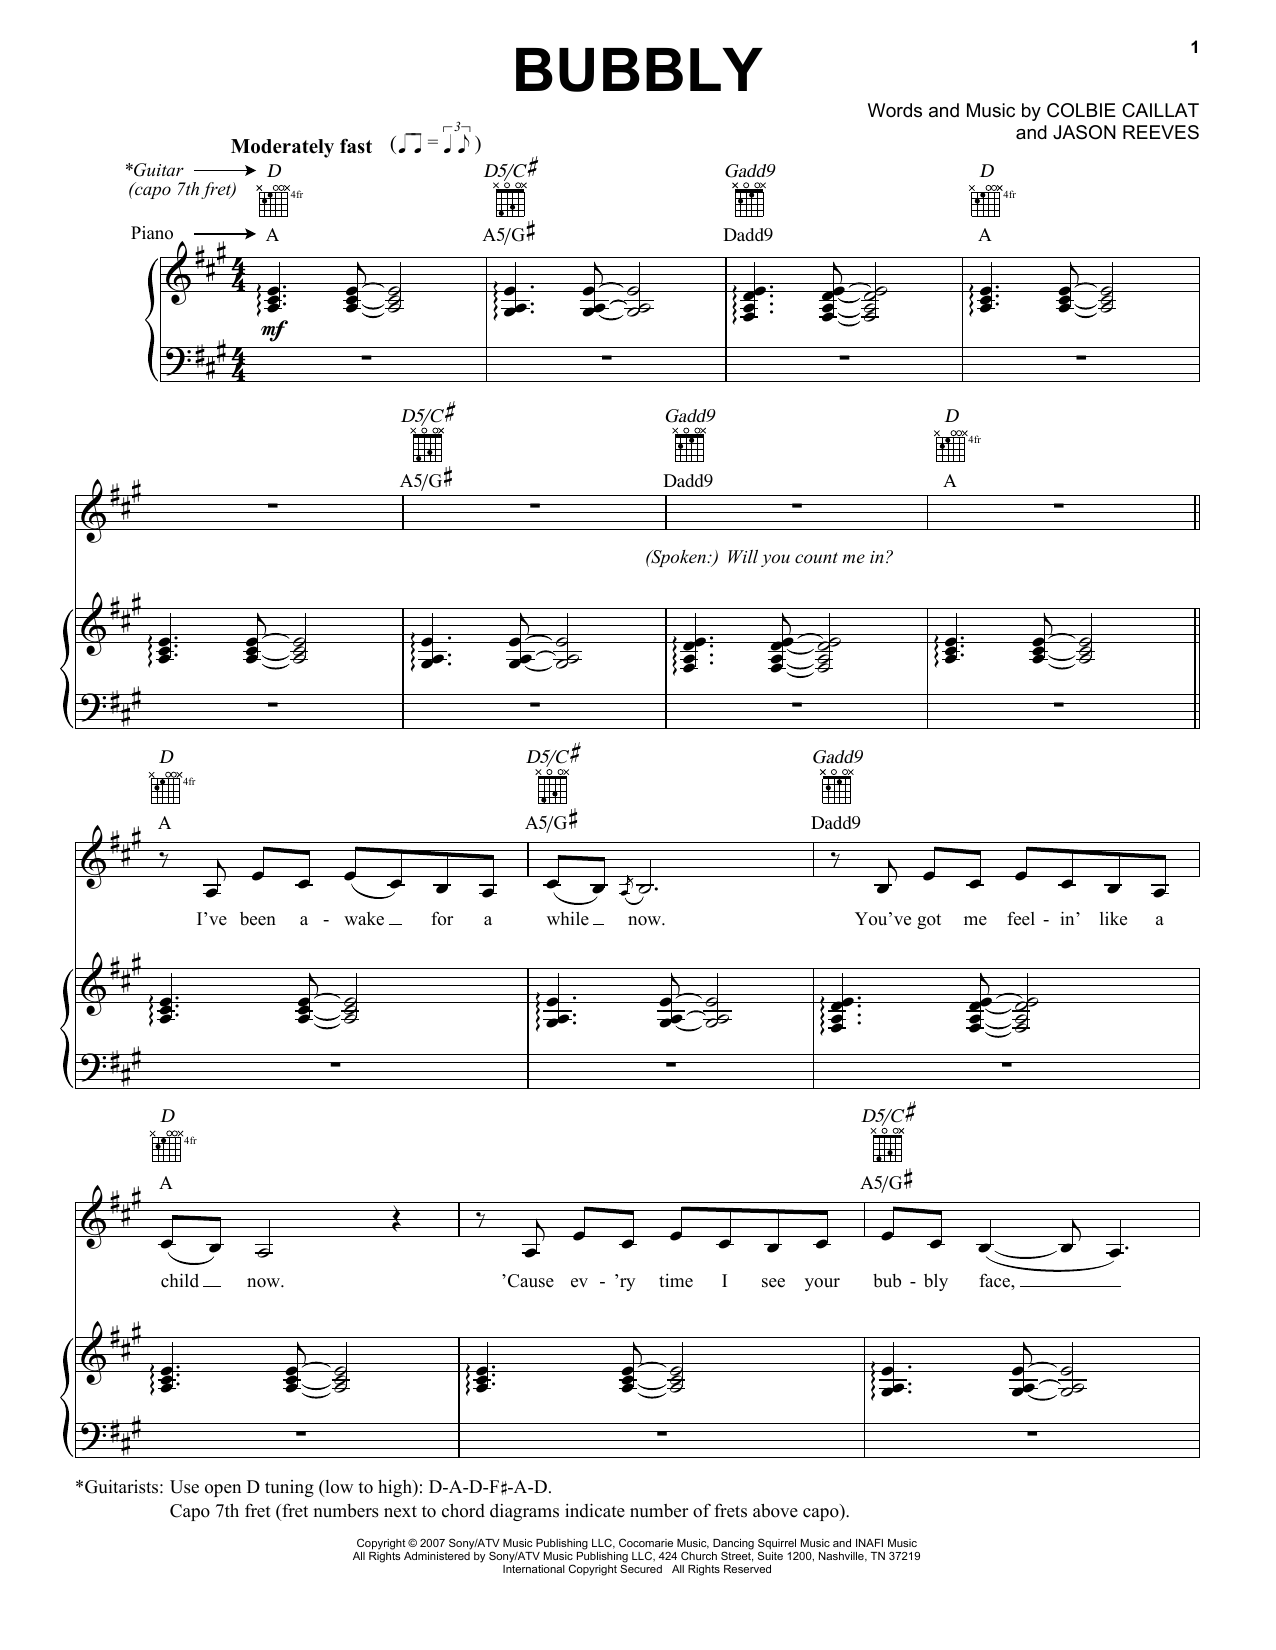 Download Colbie Caillat Bubbly Sheet Music